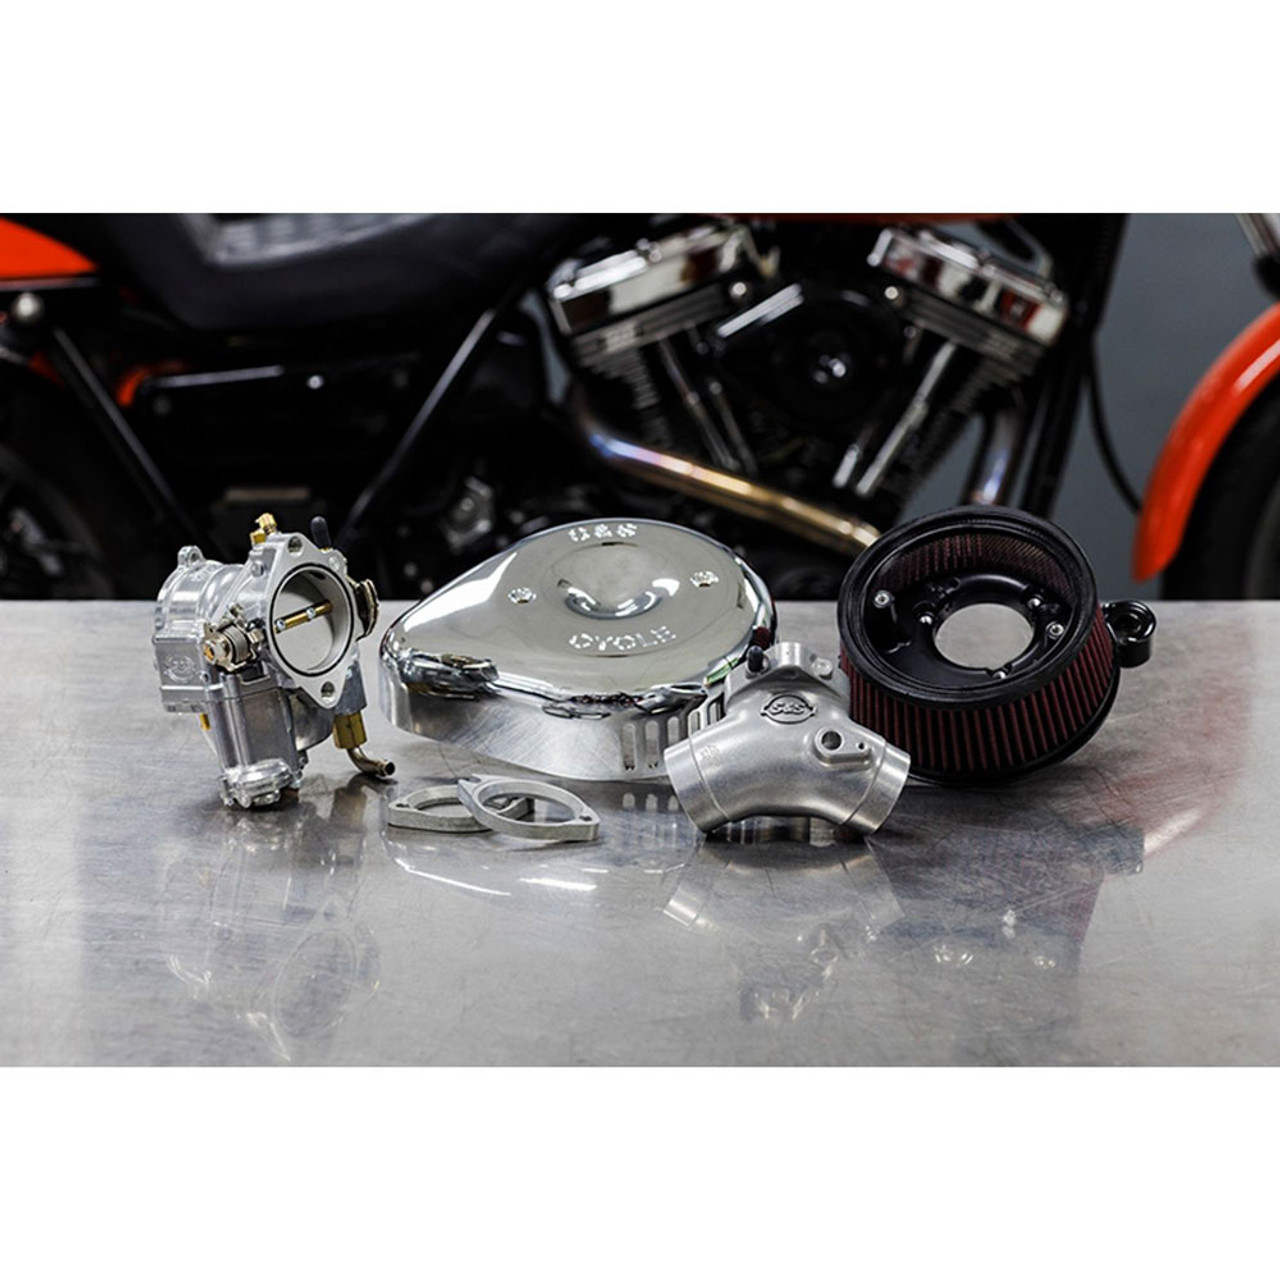 S&S Super G Carburetor & Stealth Air Cleaner Kit for 1984-1999 Harley -  Chrome - 110-0147 - Get Lowered Cycles